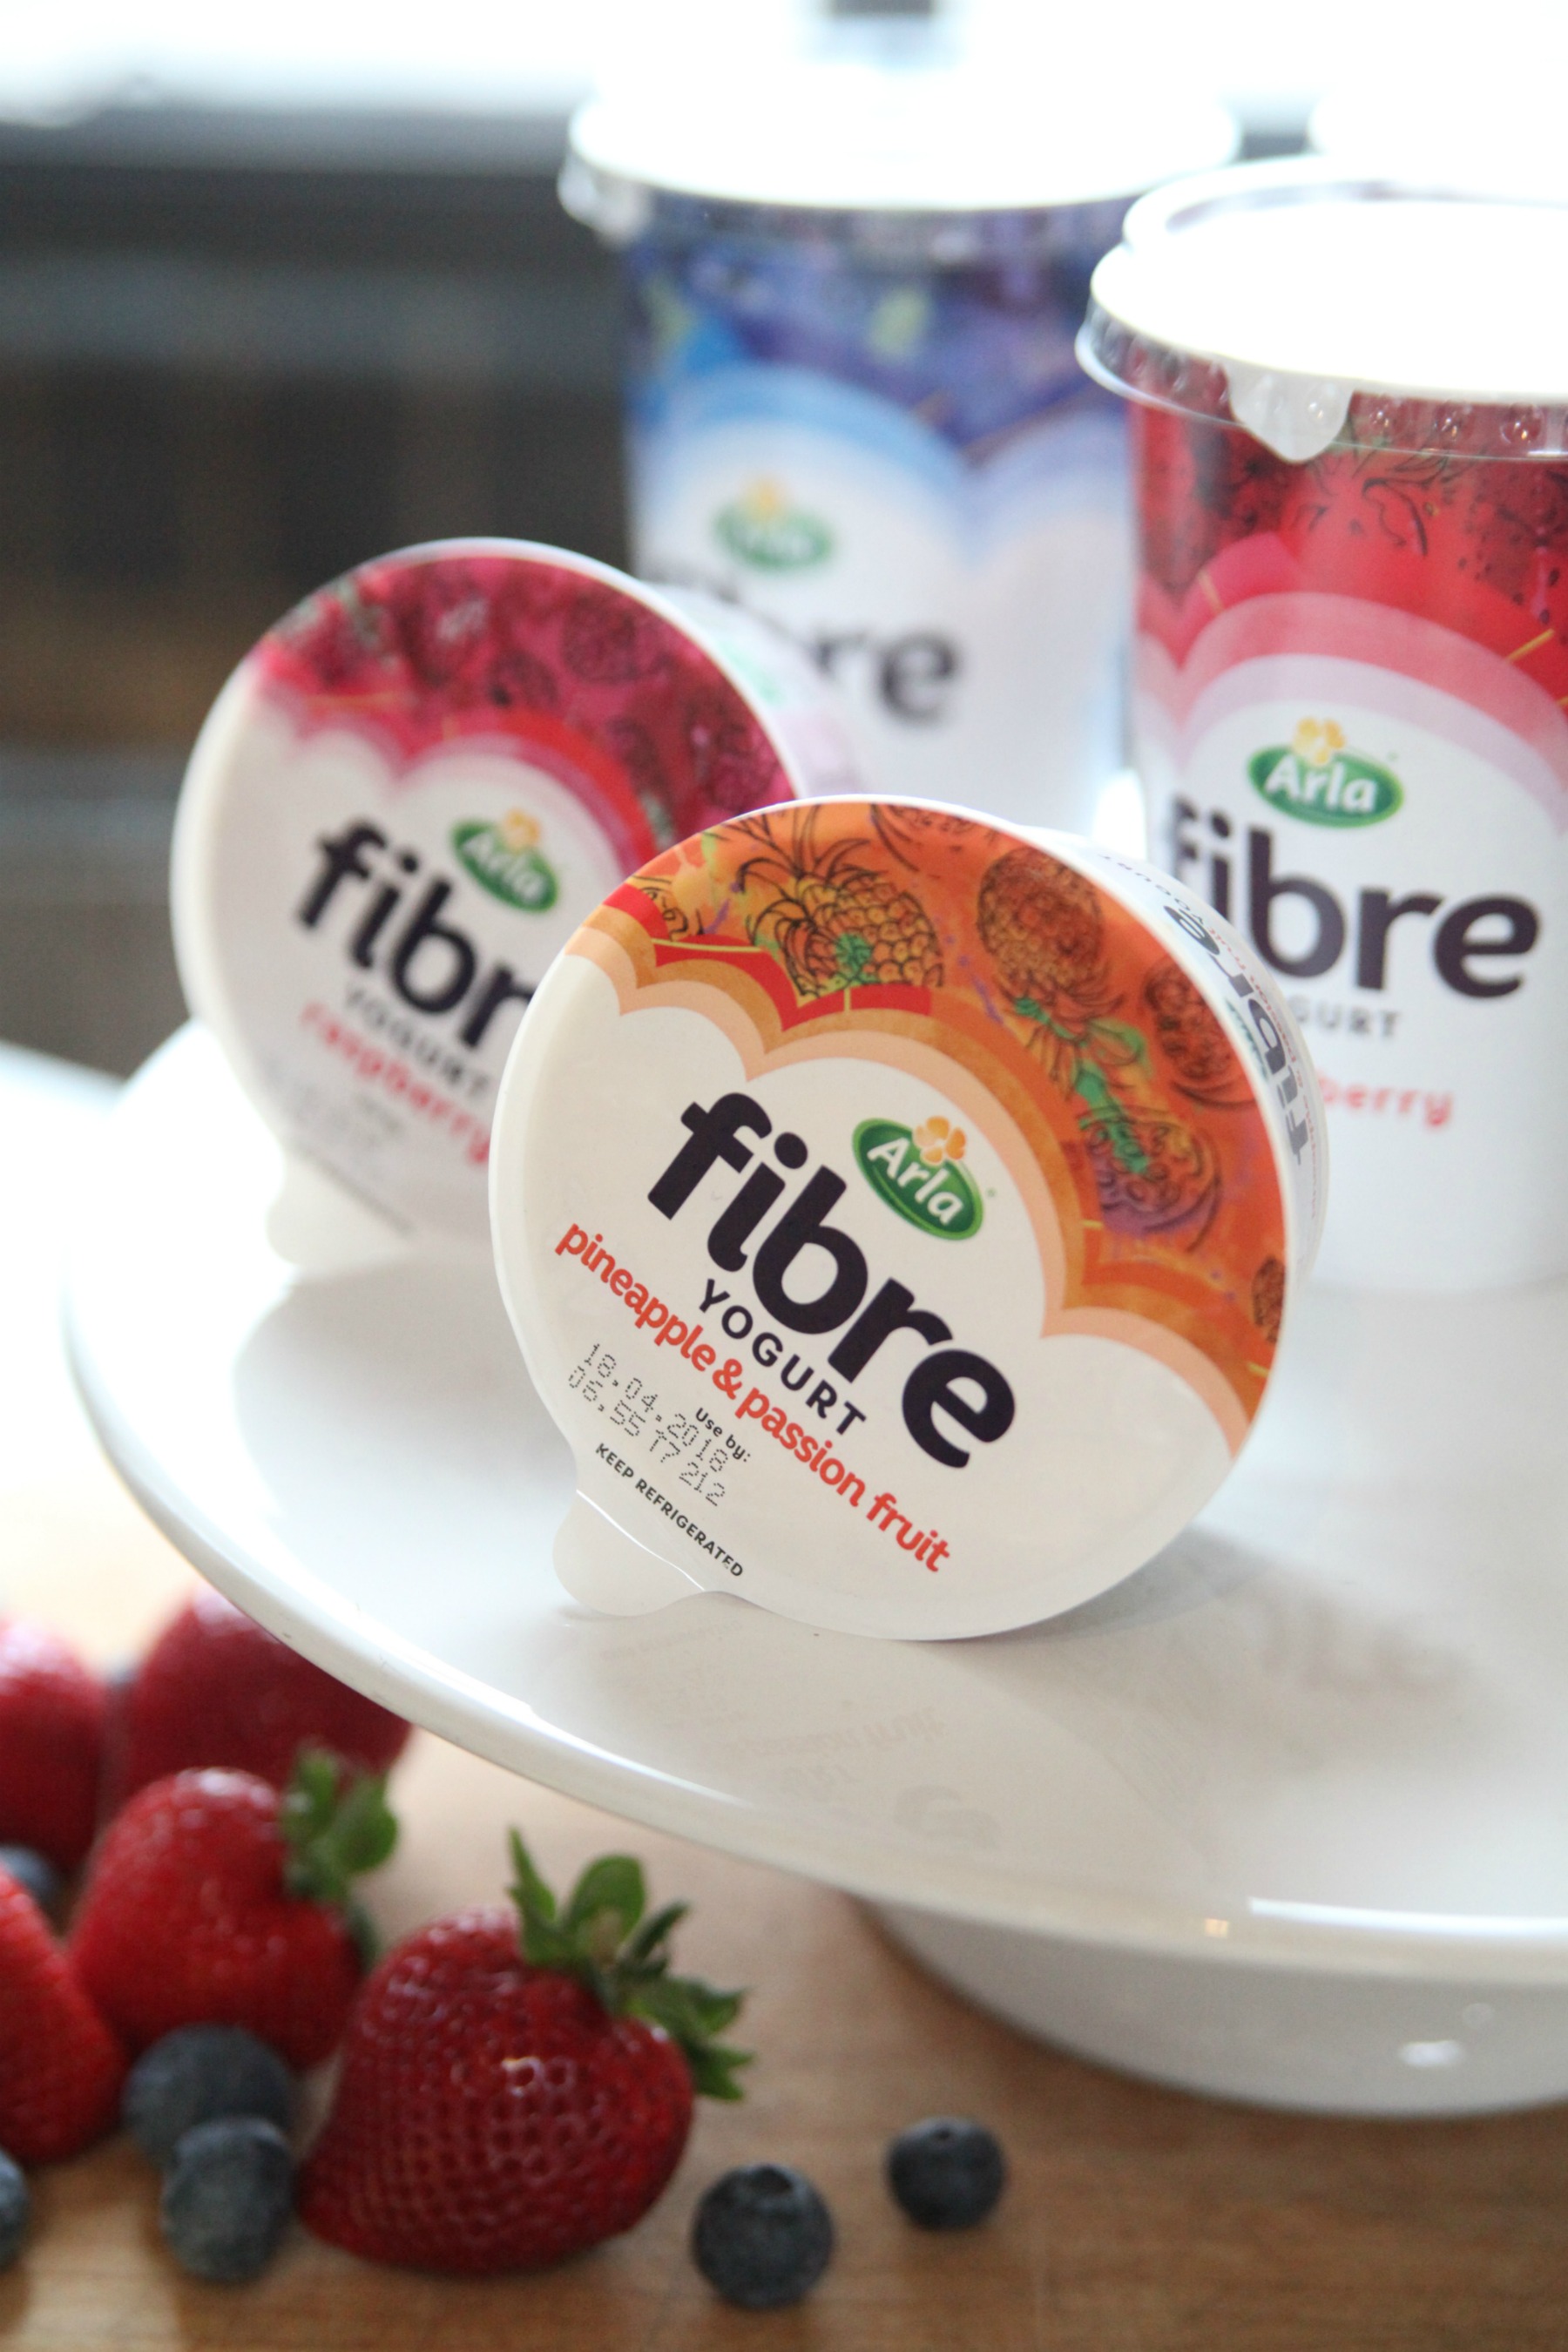 New Arla Fibre pots with pineapple and passion fruit